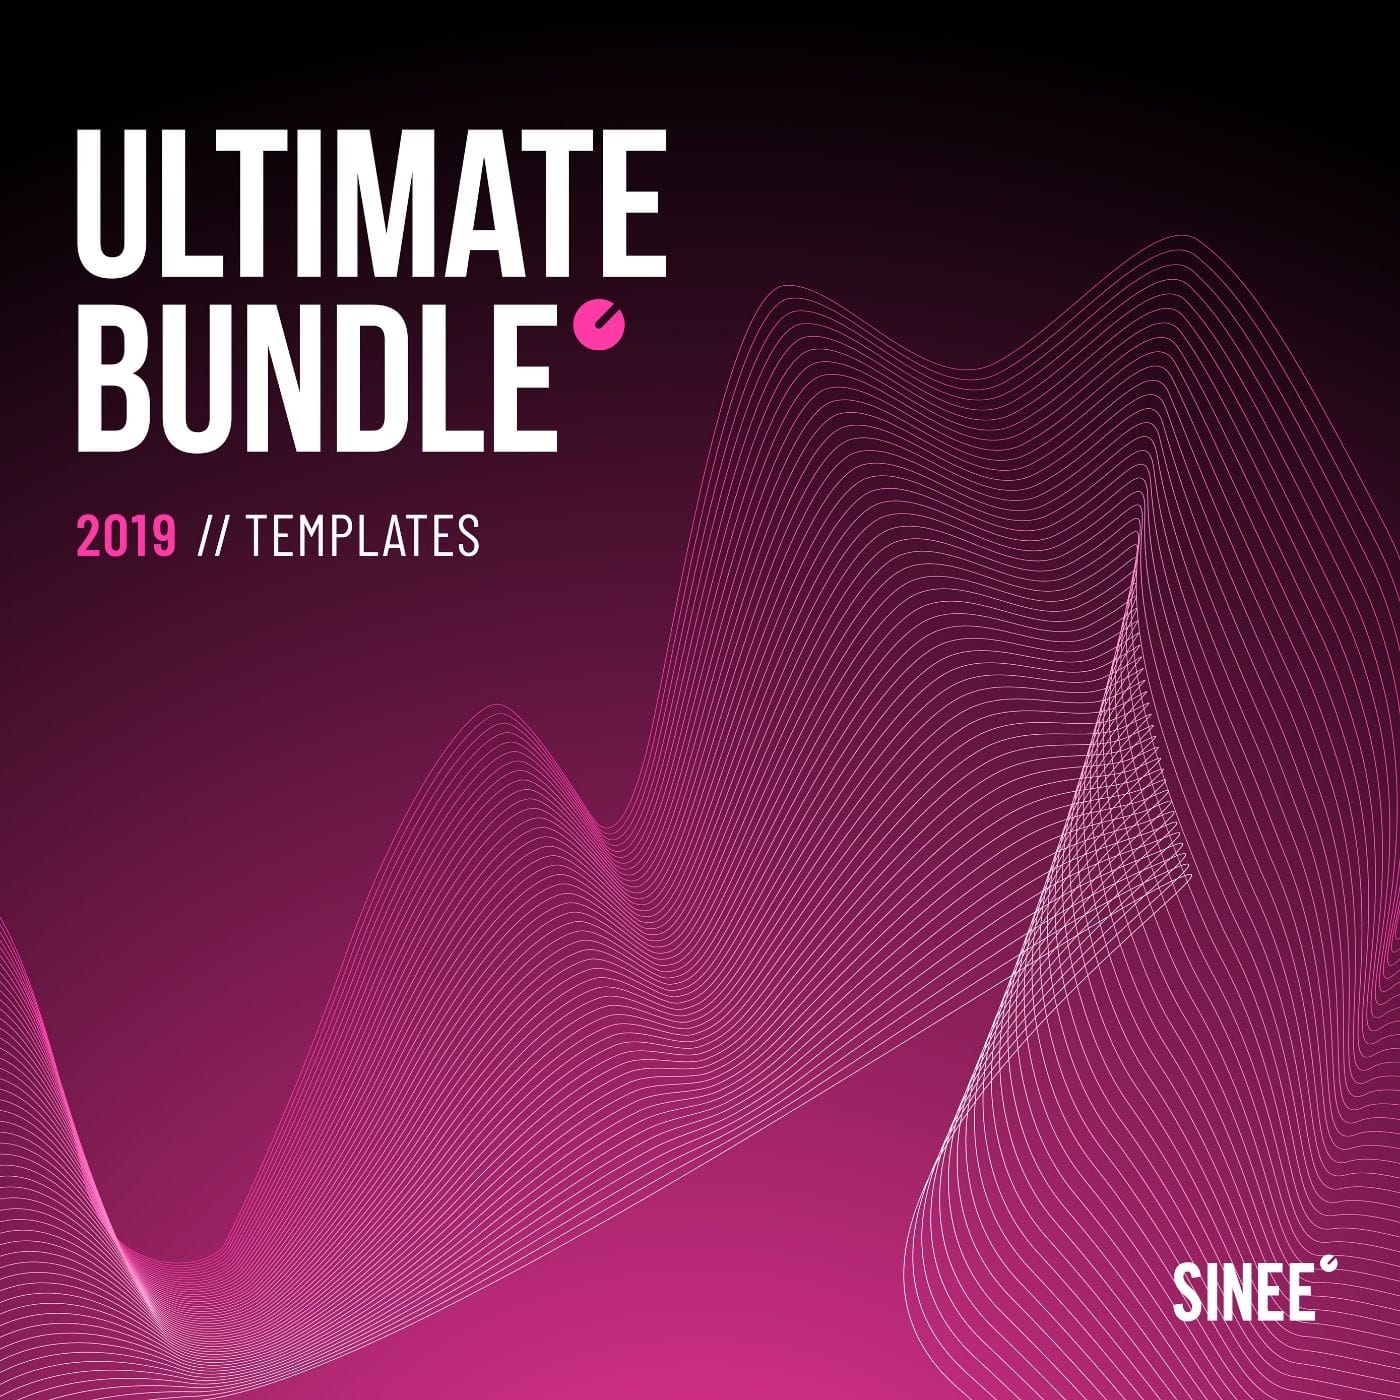 Product Cover - Ultimate Bundle Templates 2019